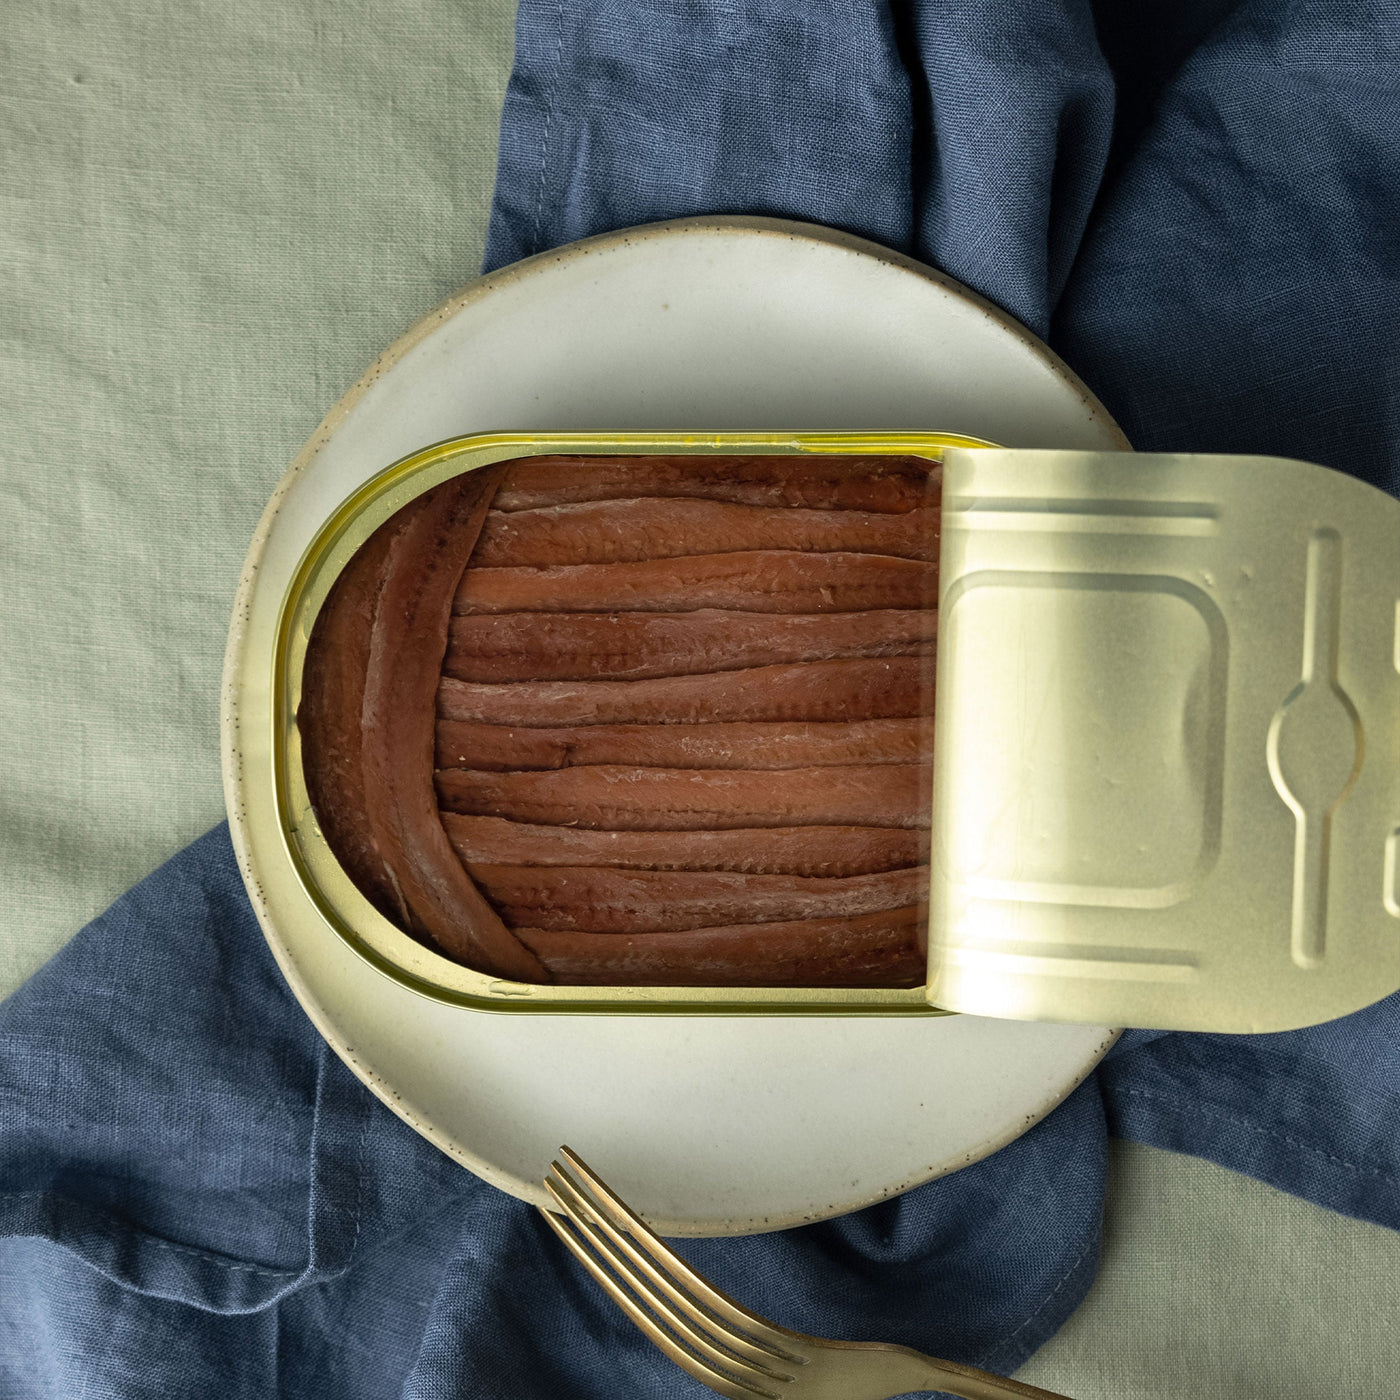 Omeio Artisanal Deli Tinned Seafood Gourmet Cantabrian Fillets of Anchovies in Olive Oil 115g